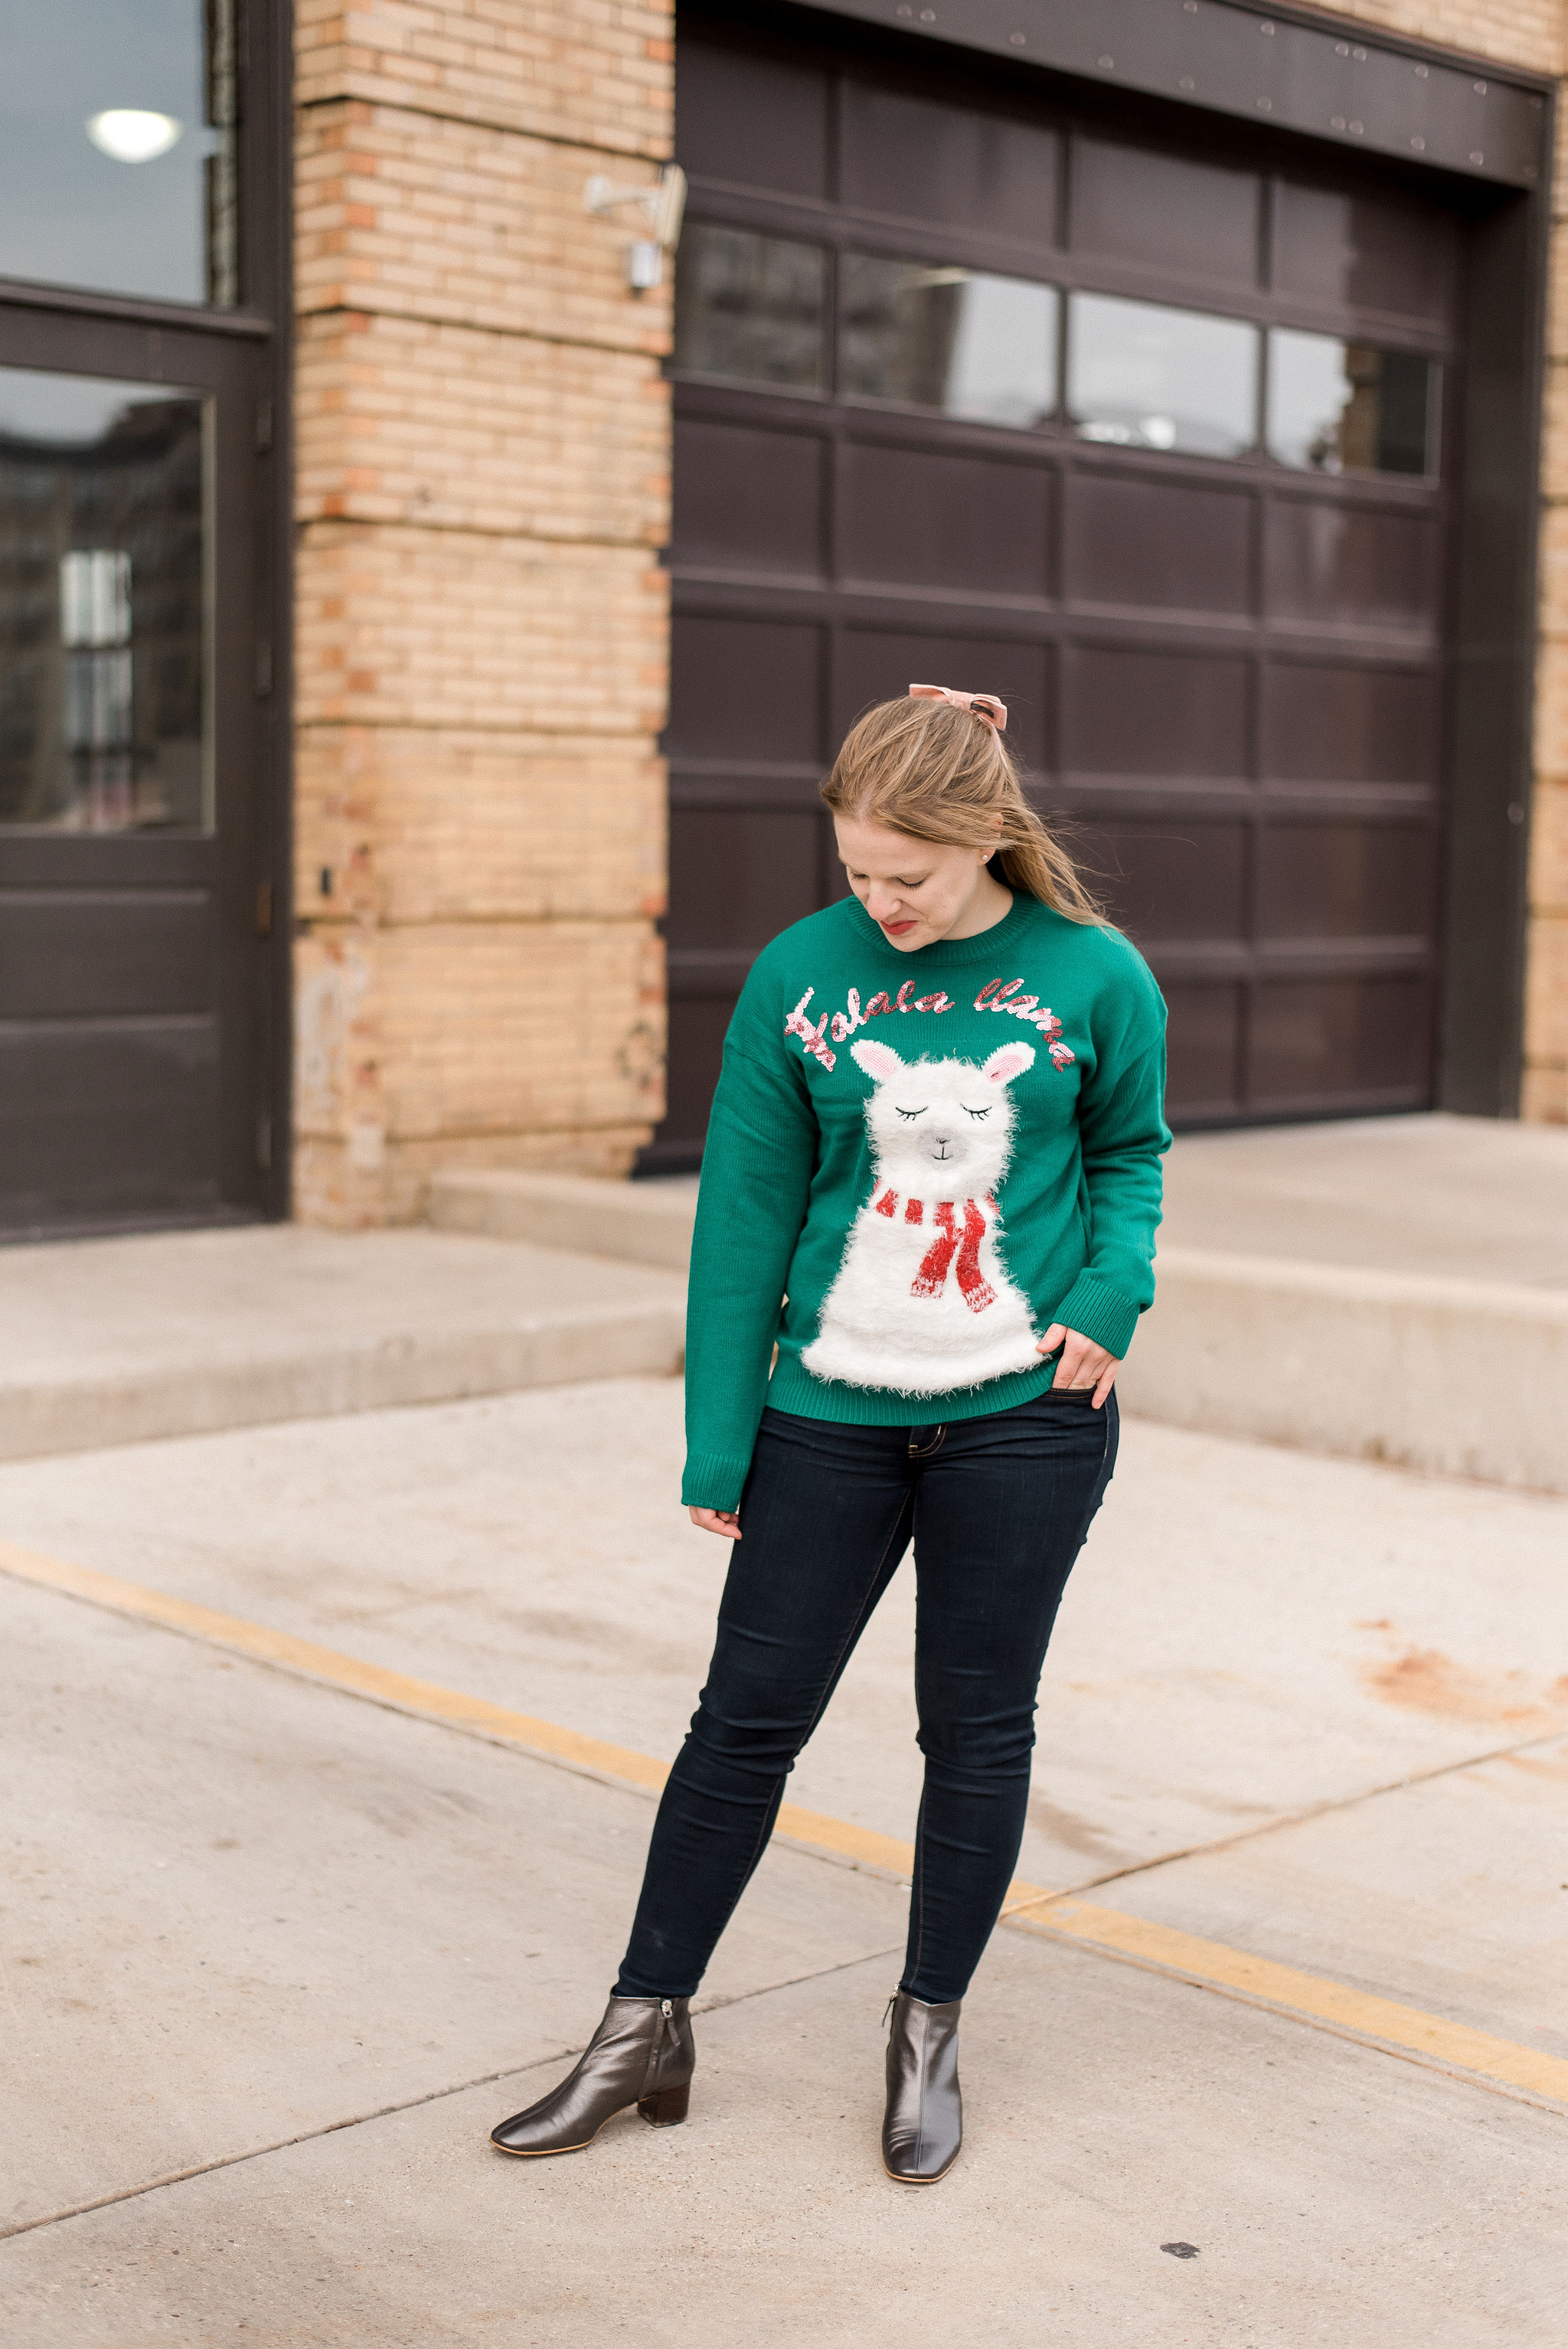 DC woman blogger wearing New Look christmas sweater with llama print in green